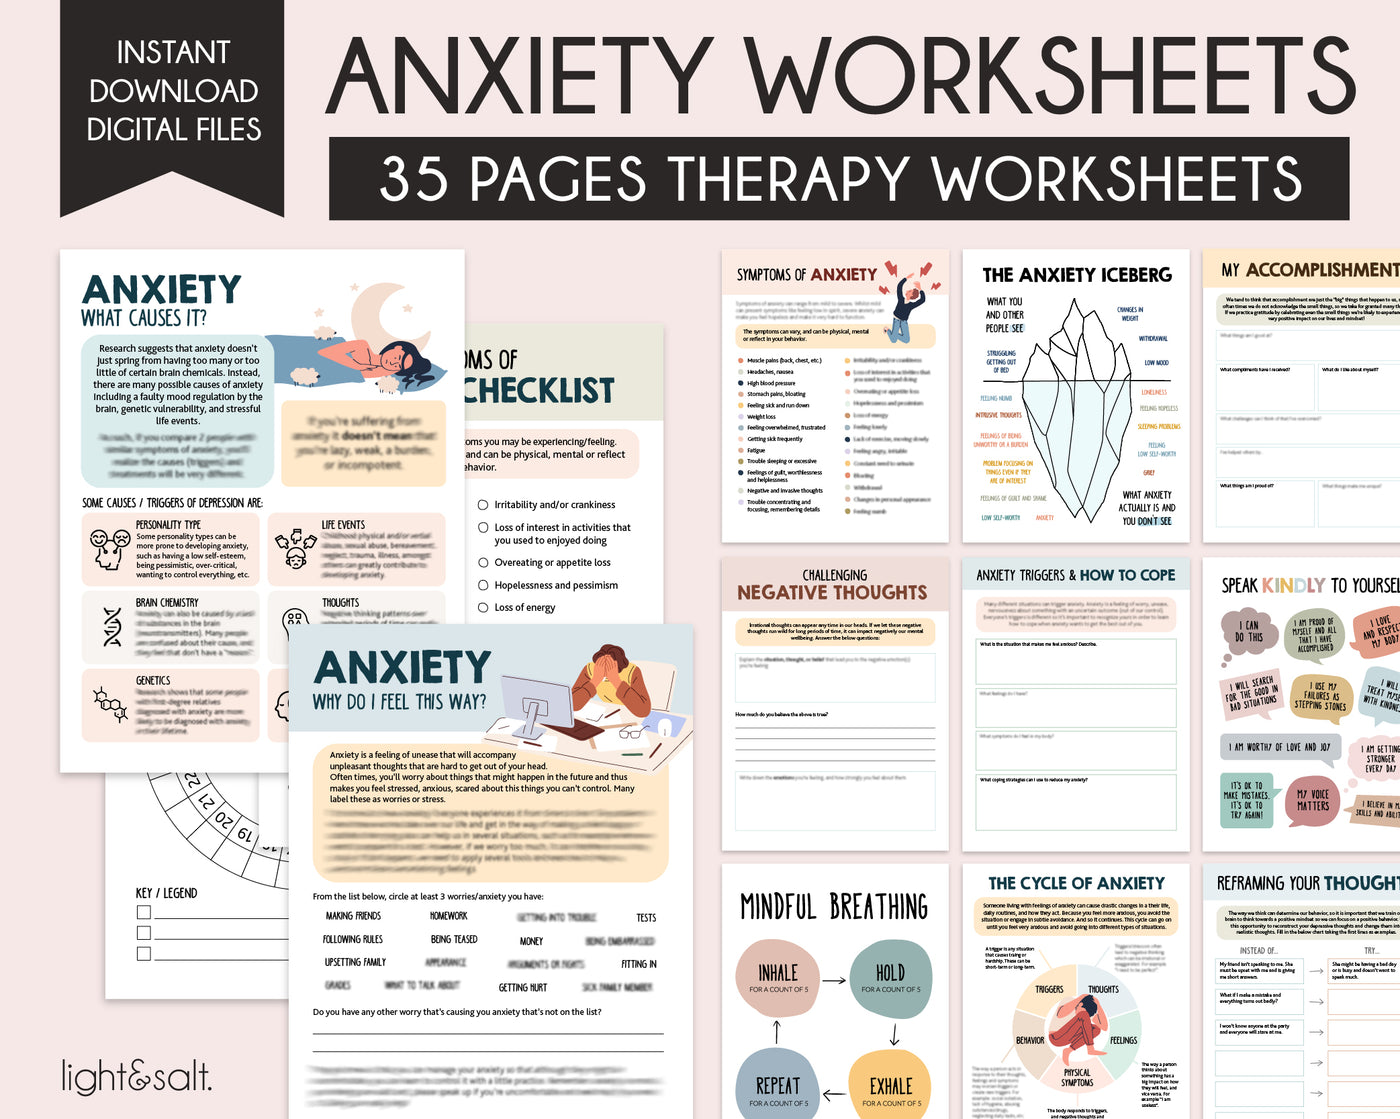 Therapy Resources Mega Bundle, 25% off